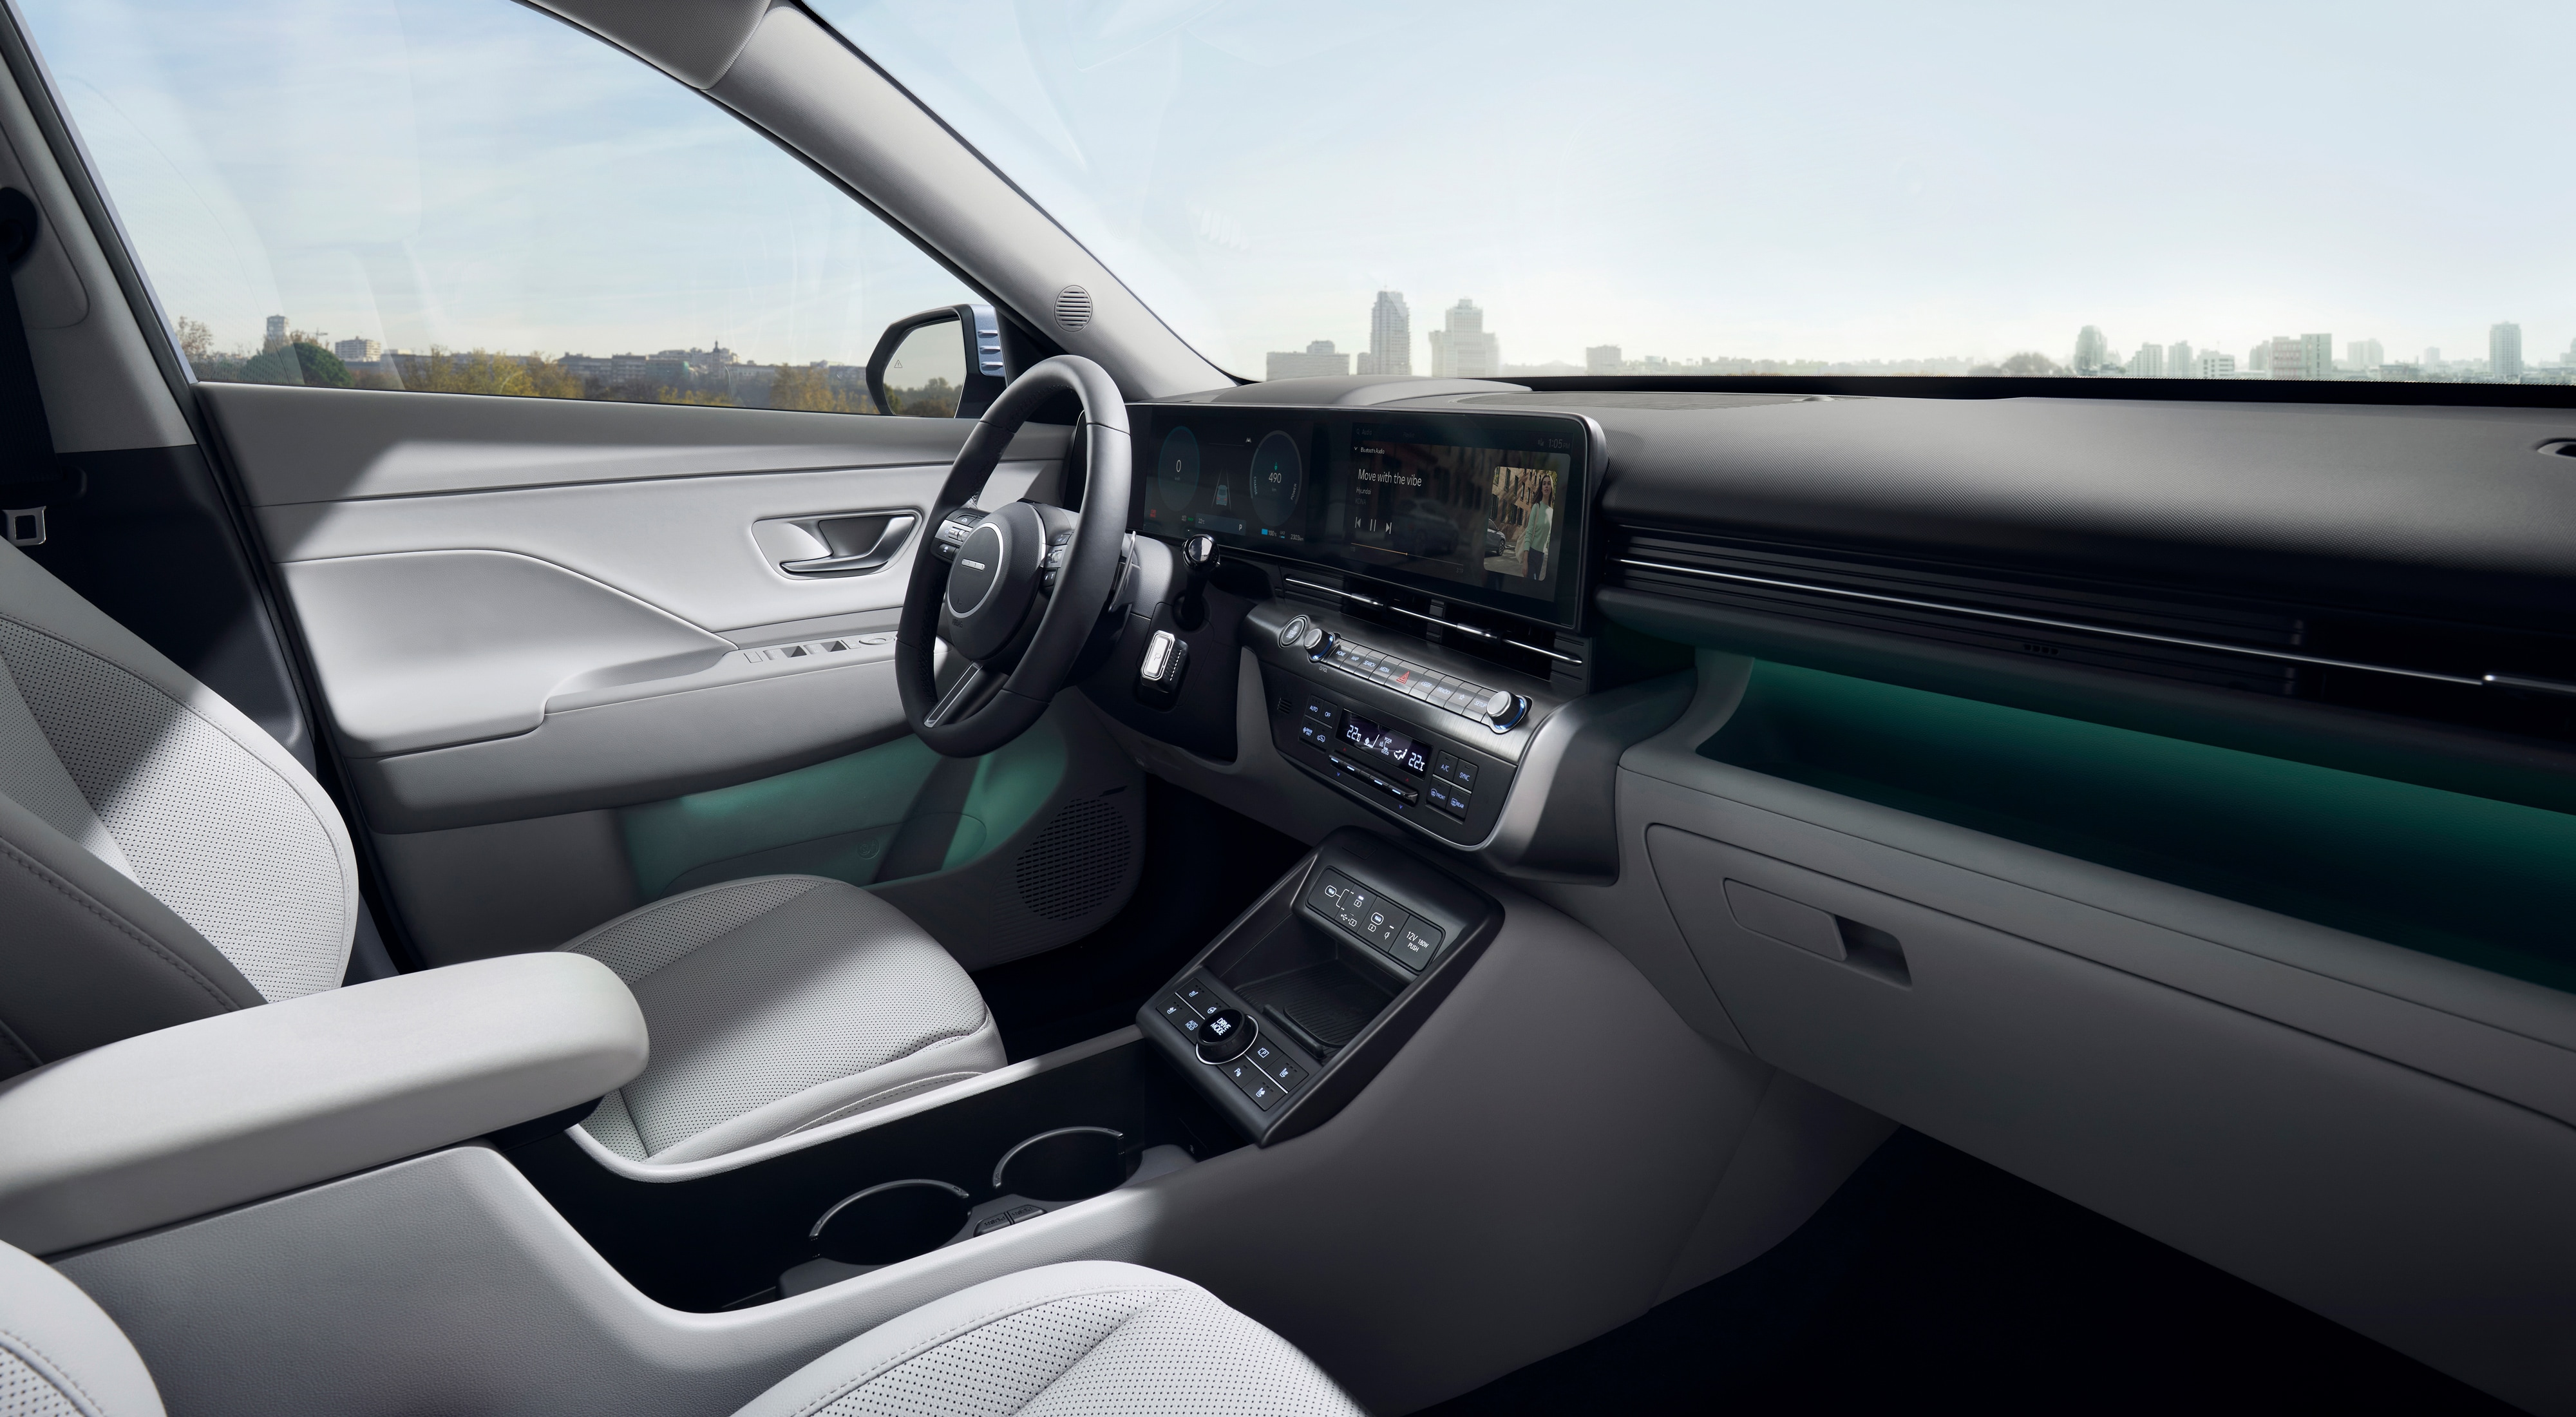 The inside view of the Hyundai KONA with green ambient lighting highlighting the display and the doors.